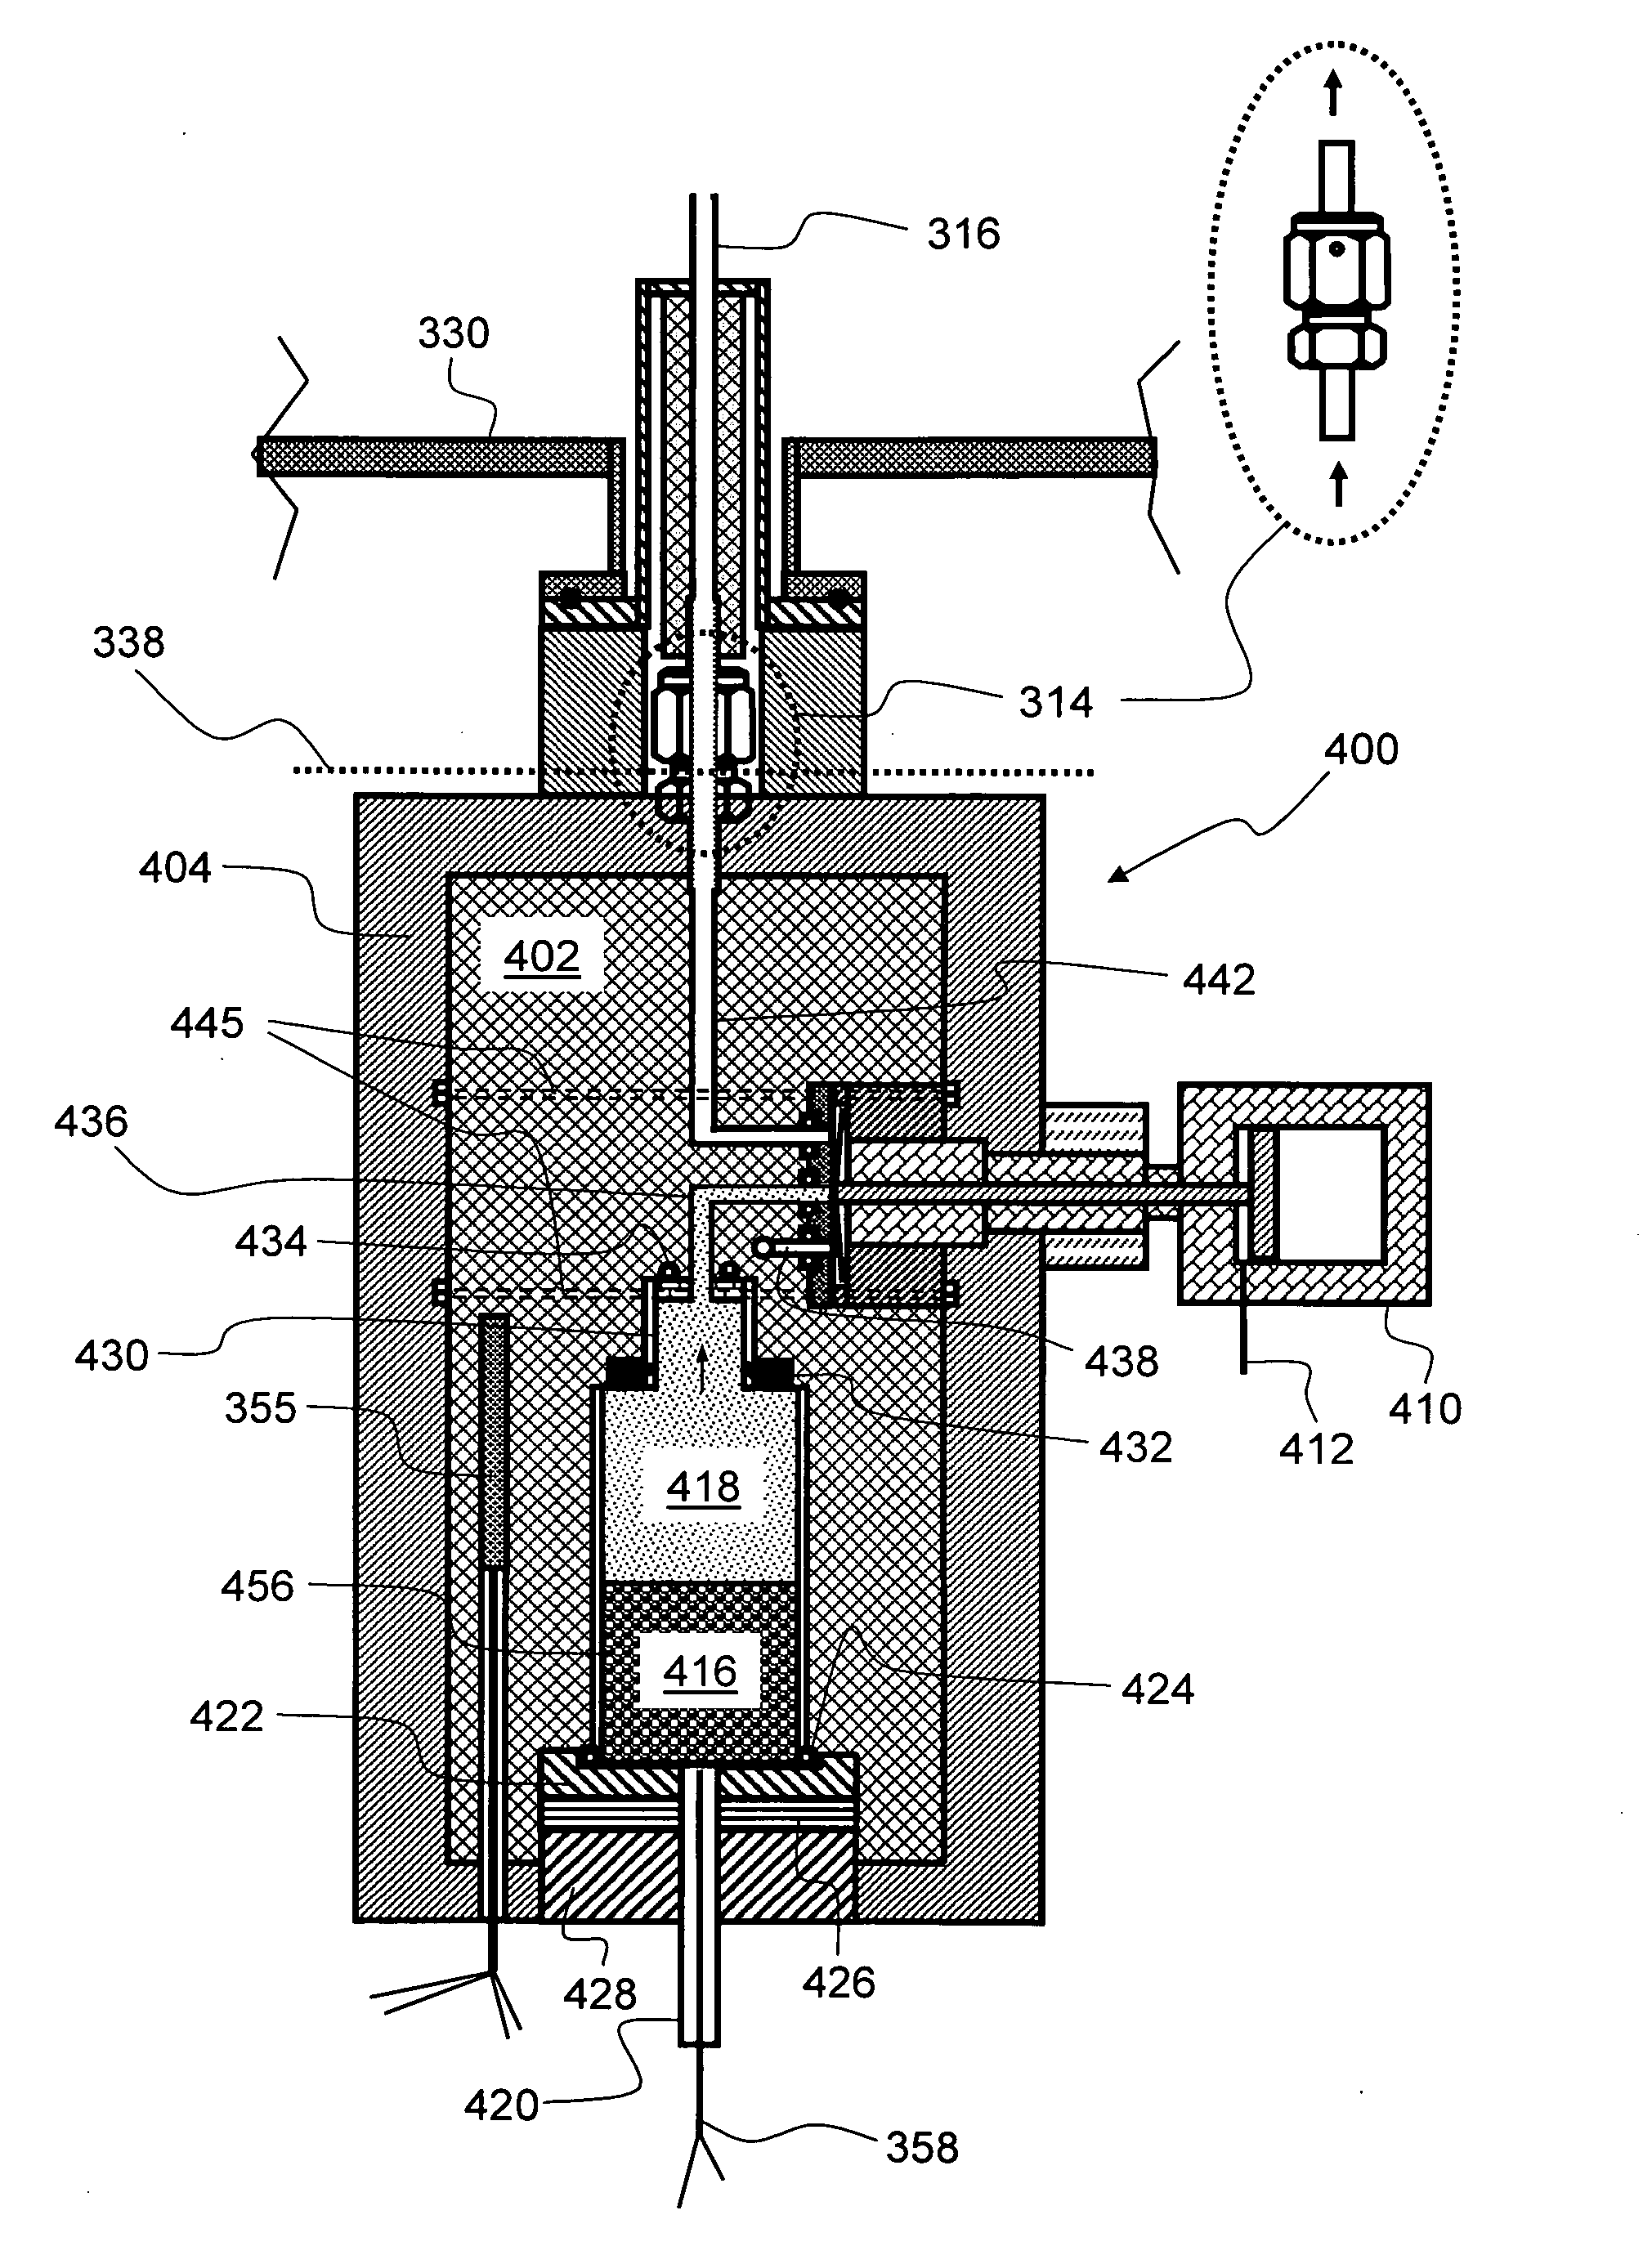 Apparatus and methods for deposition reactors